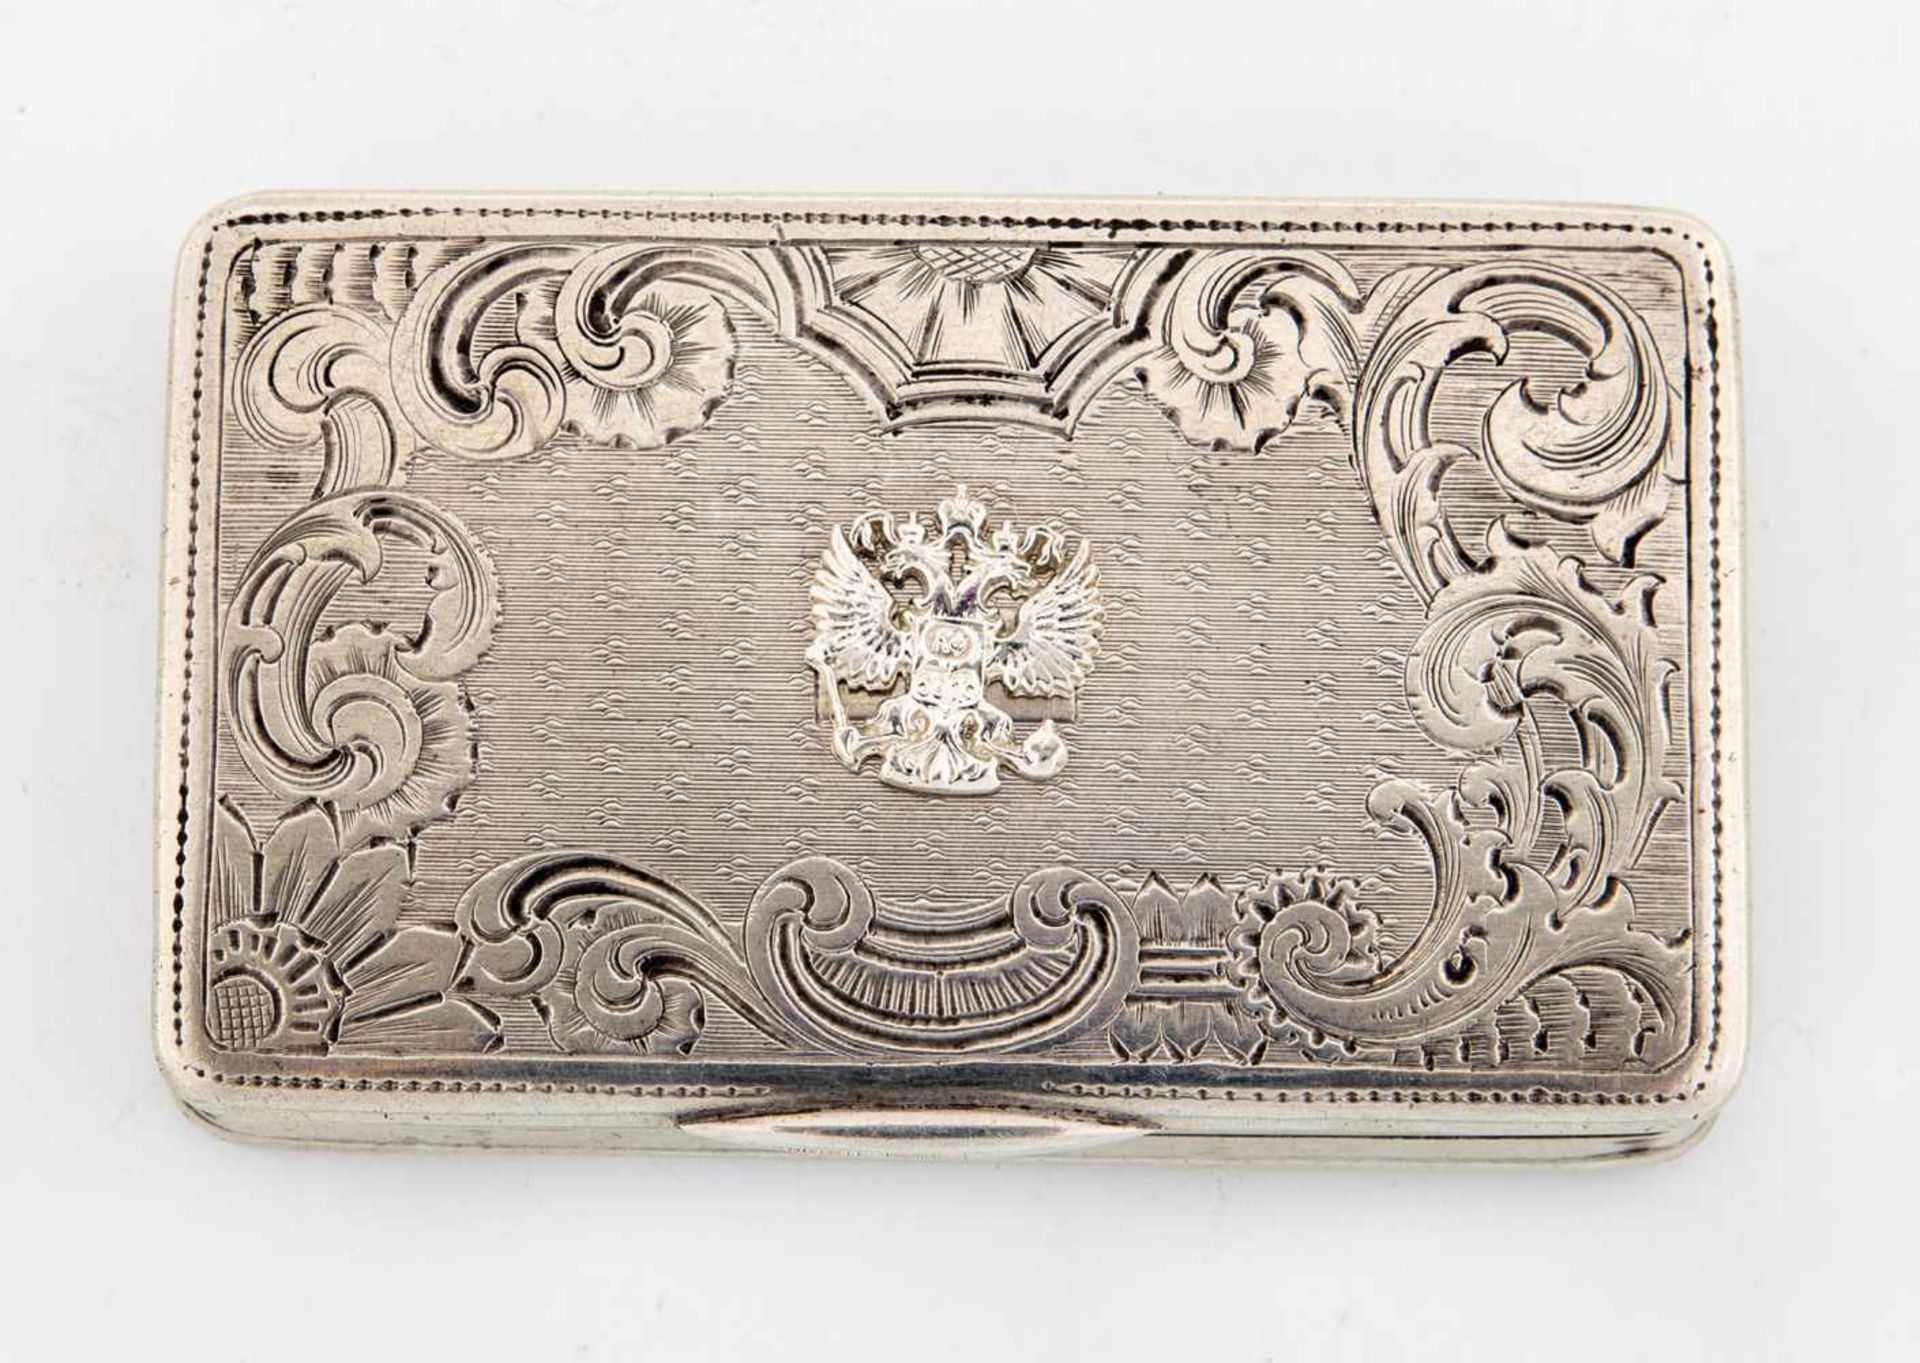 A silver cigarette case. Russia, 2nd half of the 20th century. Engraved and guillocheddecor. Applied